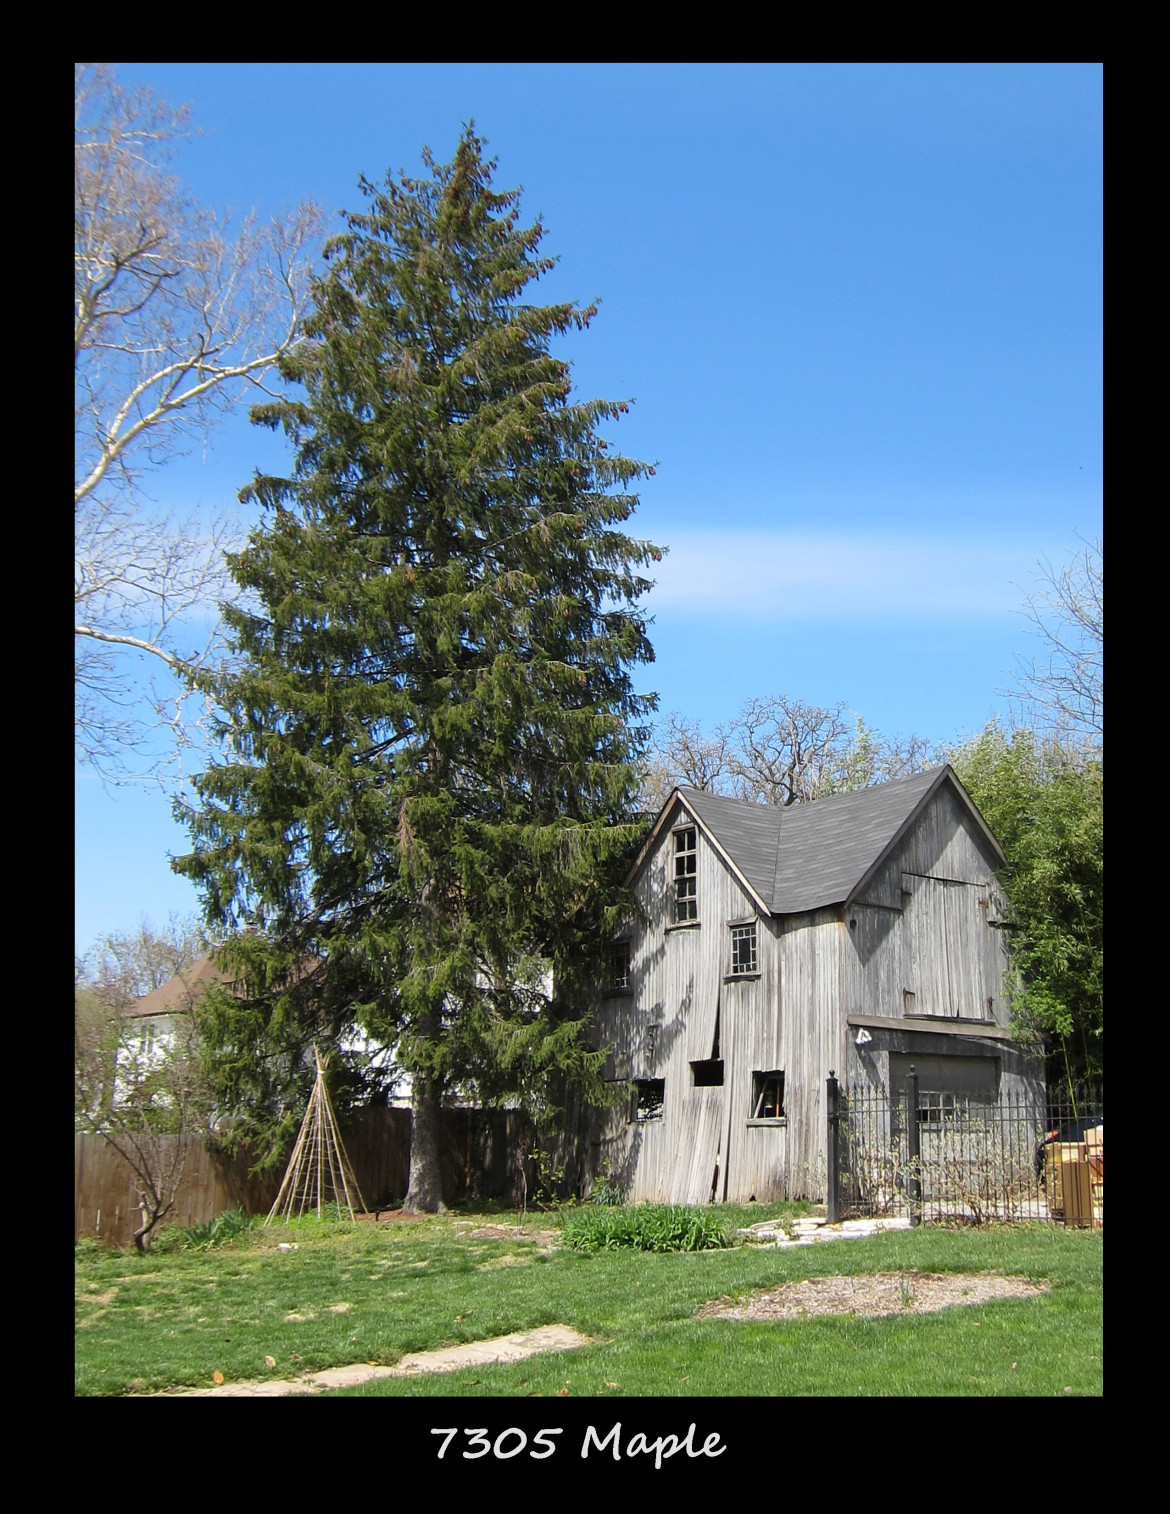 This loss was a real heartbreaker.  This was the last two-story barn or carriage house with hay loft, whichever you prefer, in Maplewood.  It had deteriorated to the point that a restoration wasn't economically possible.  Too bad.  It looked like a painting.